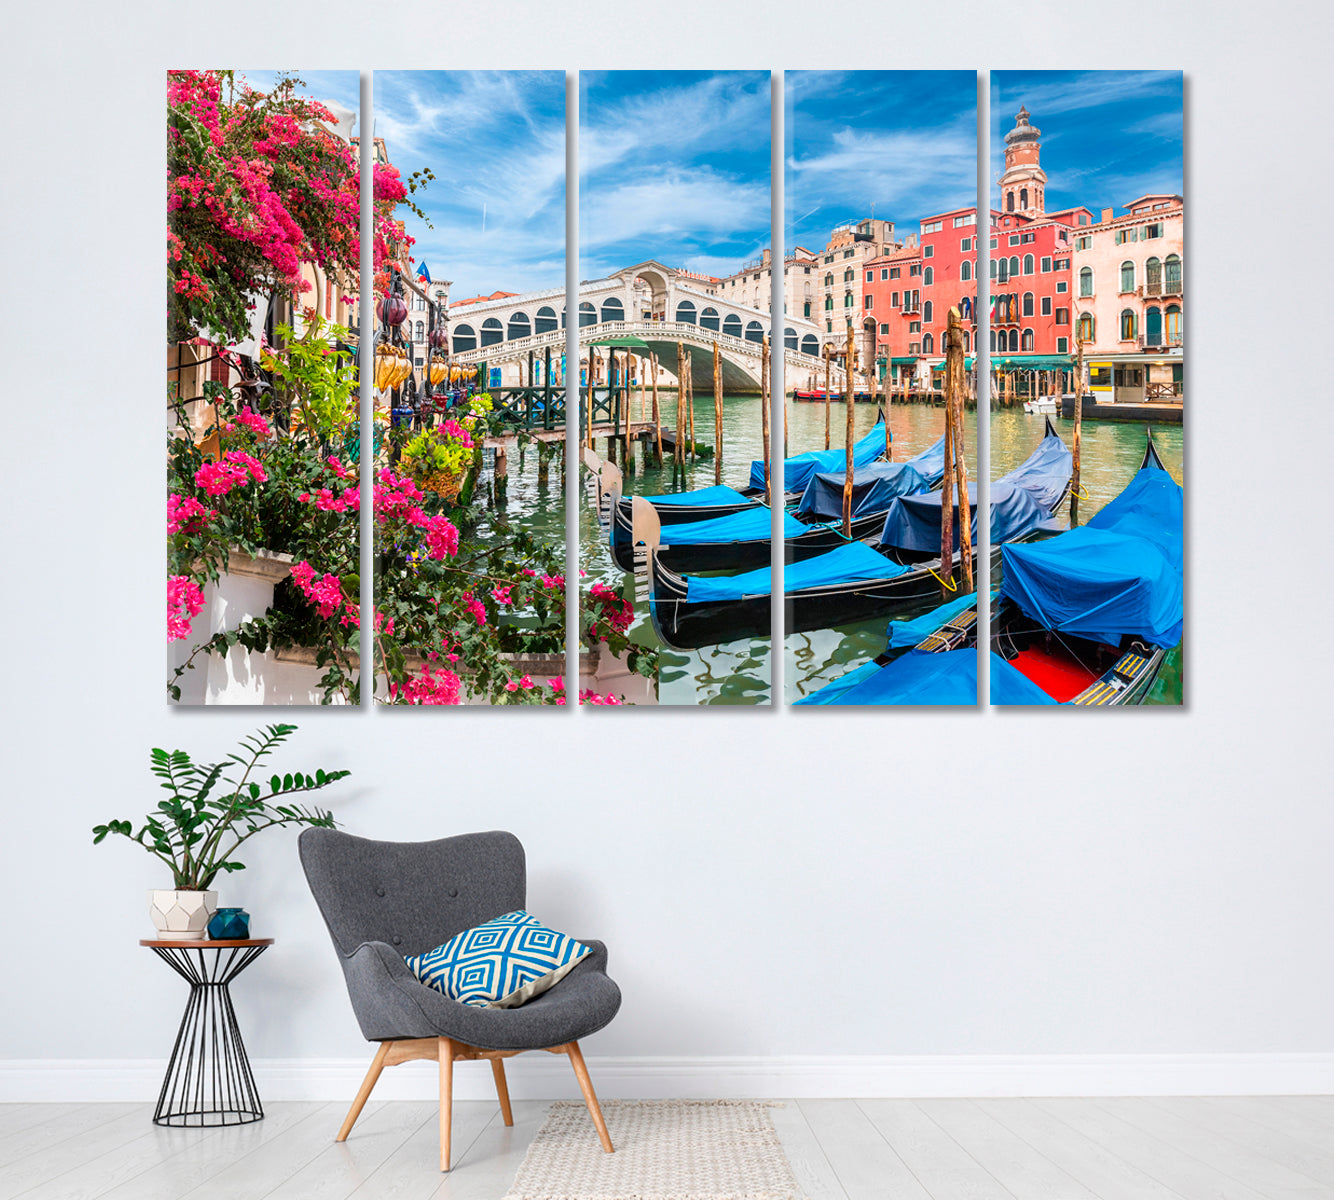 Gondola on Grand Canal Venice Italy Canvas Print ArtLexy 5 Panels 36"x24" inches 